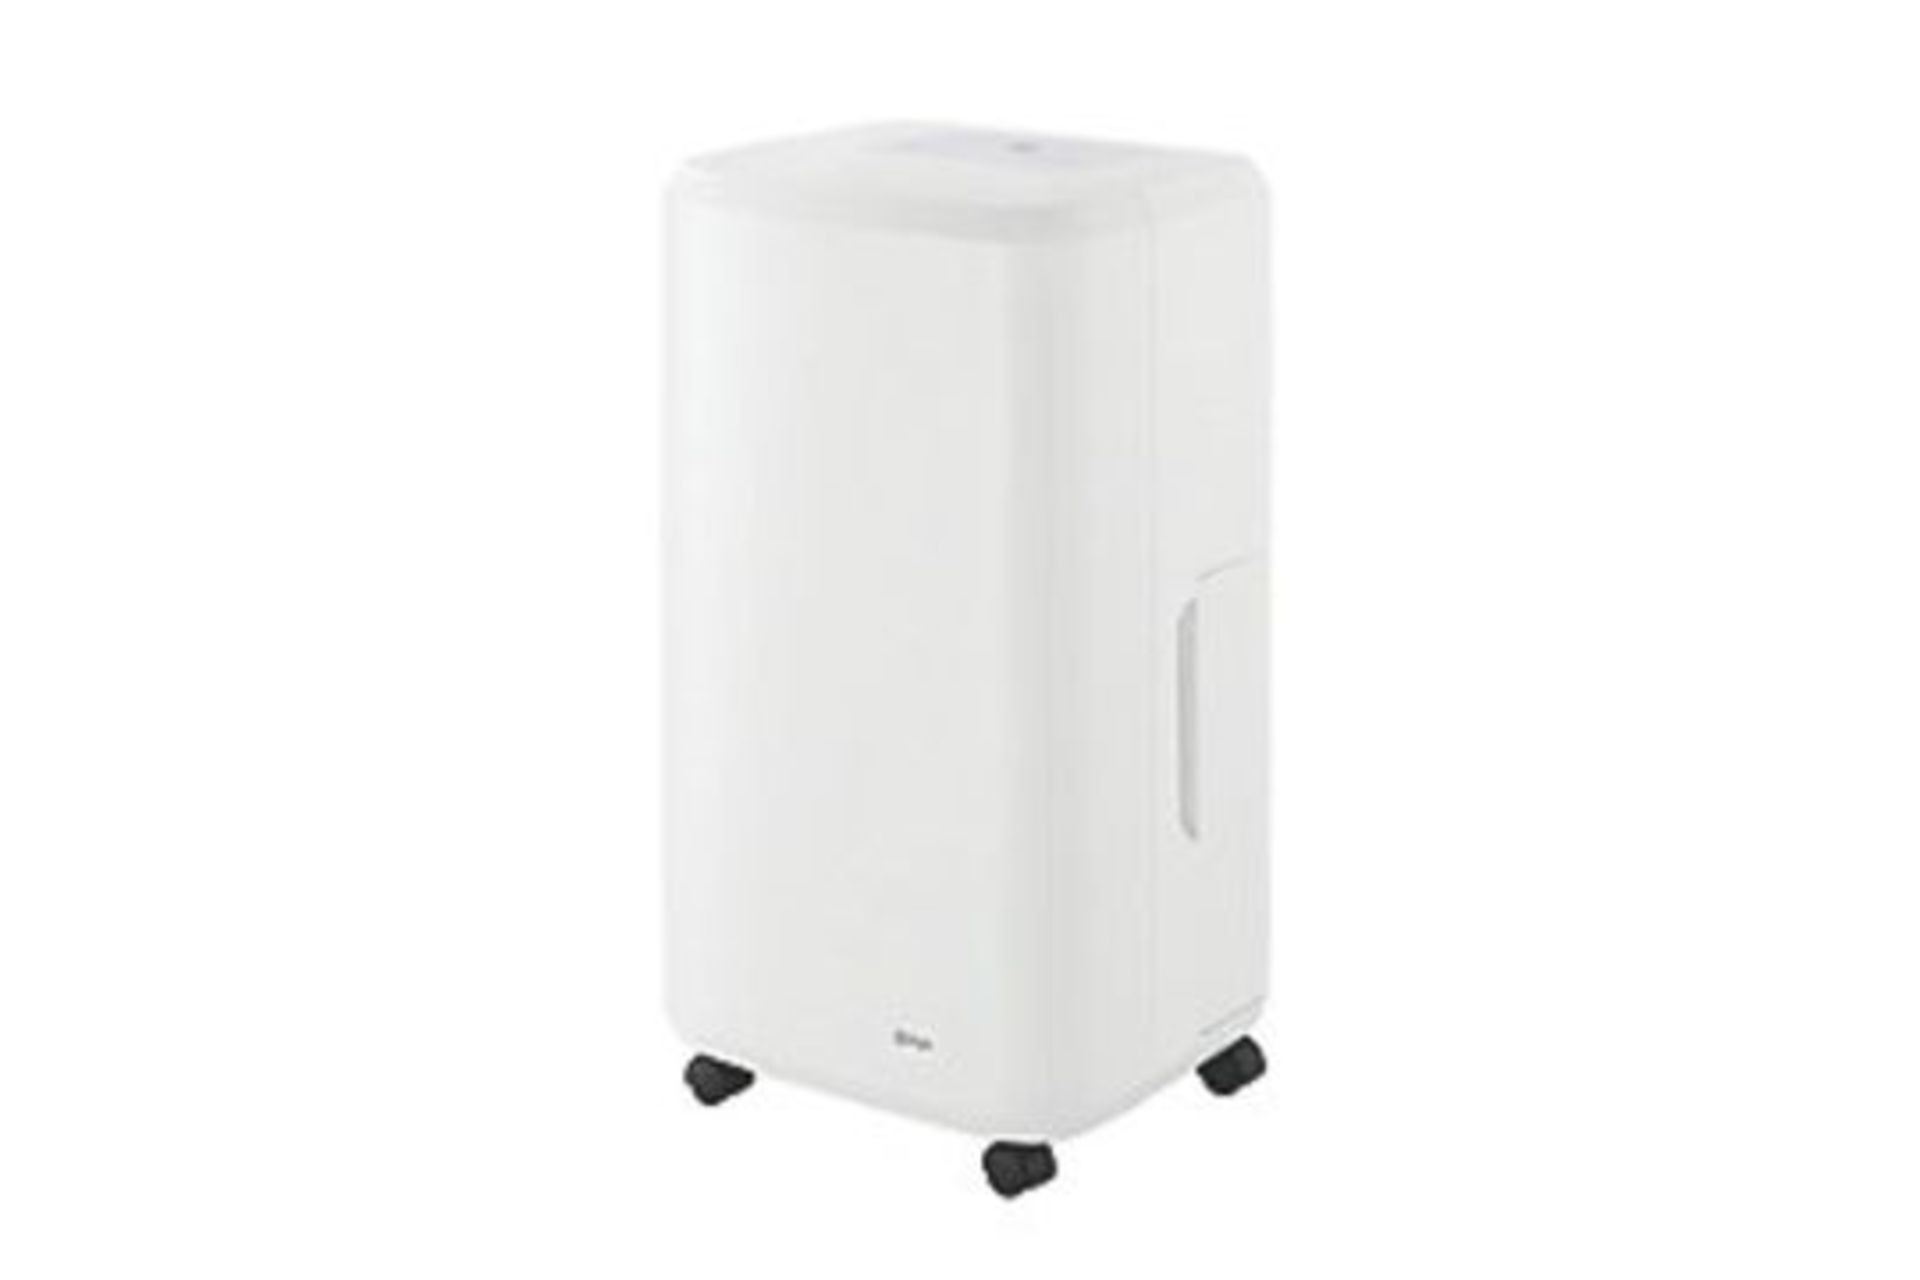 BLYSS D003A-12L 12LTR DEHUMIDIFIER. - ER52. Ideal for removing excess moisture and controlling